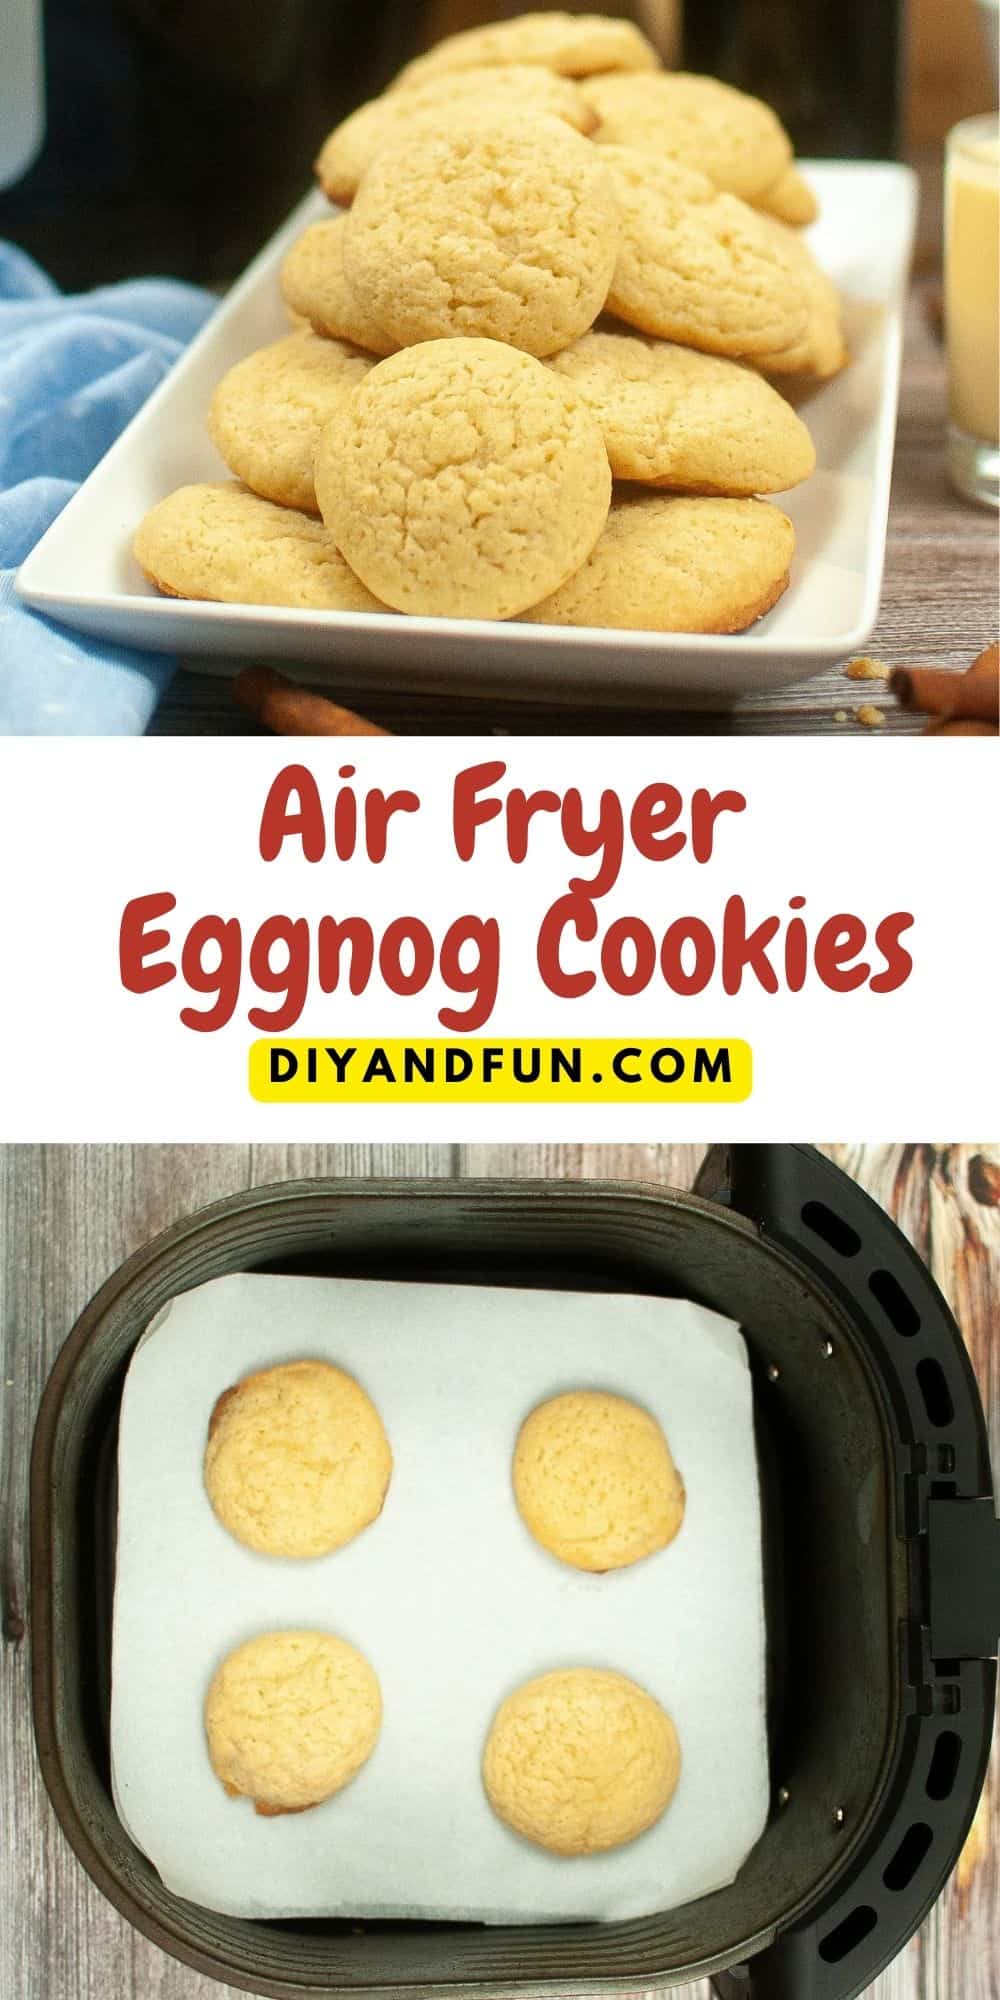 Air Fryer Eggnog Cookies, a simple and delicious holiday inspired dessert or snack recipe made with real eggnog.